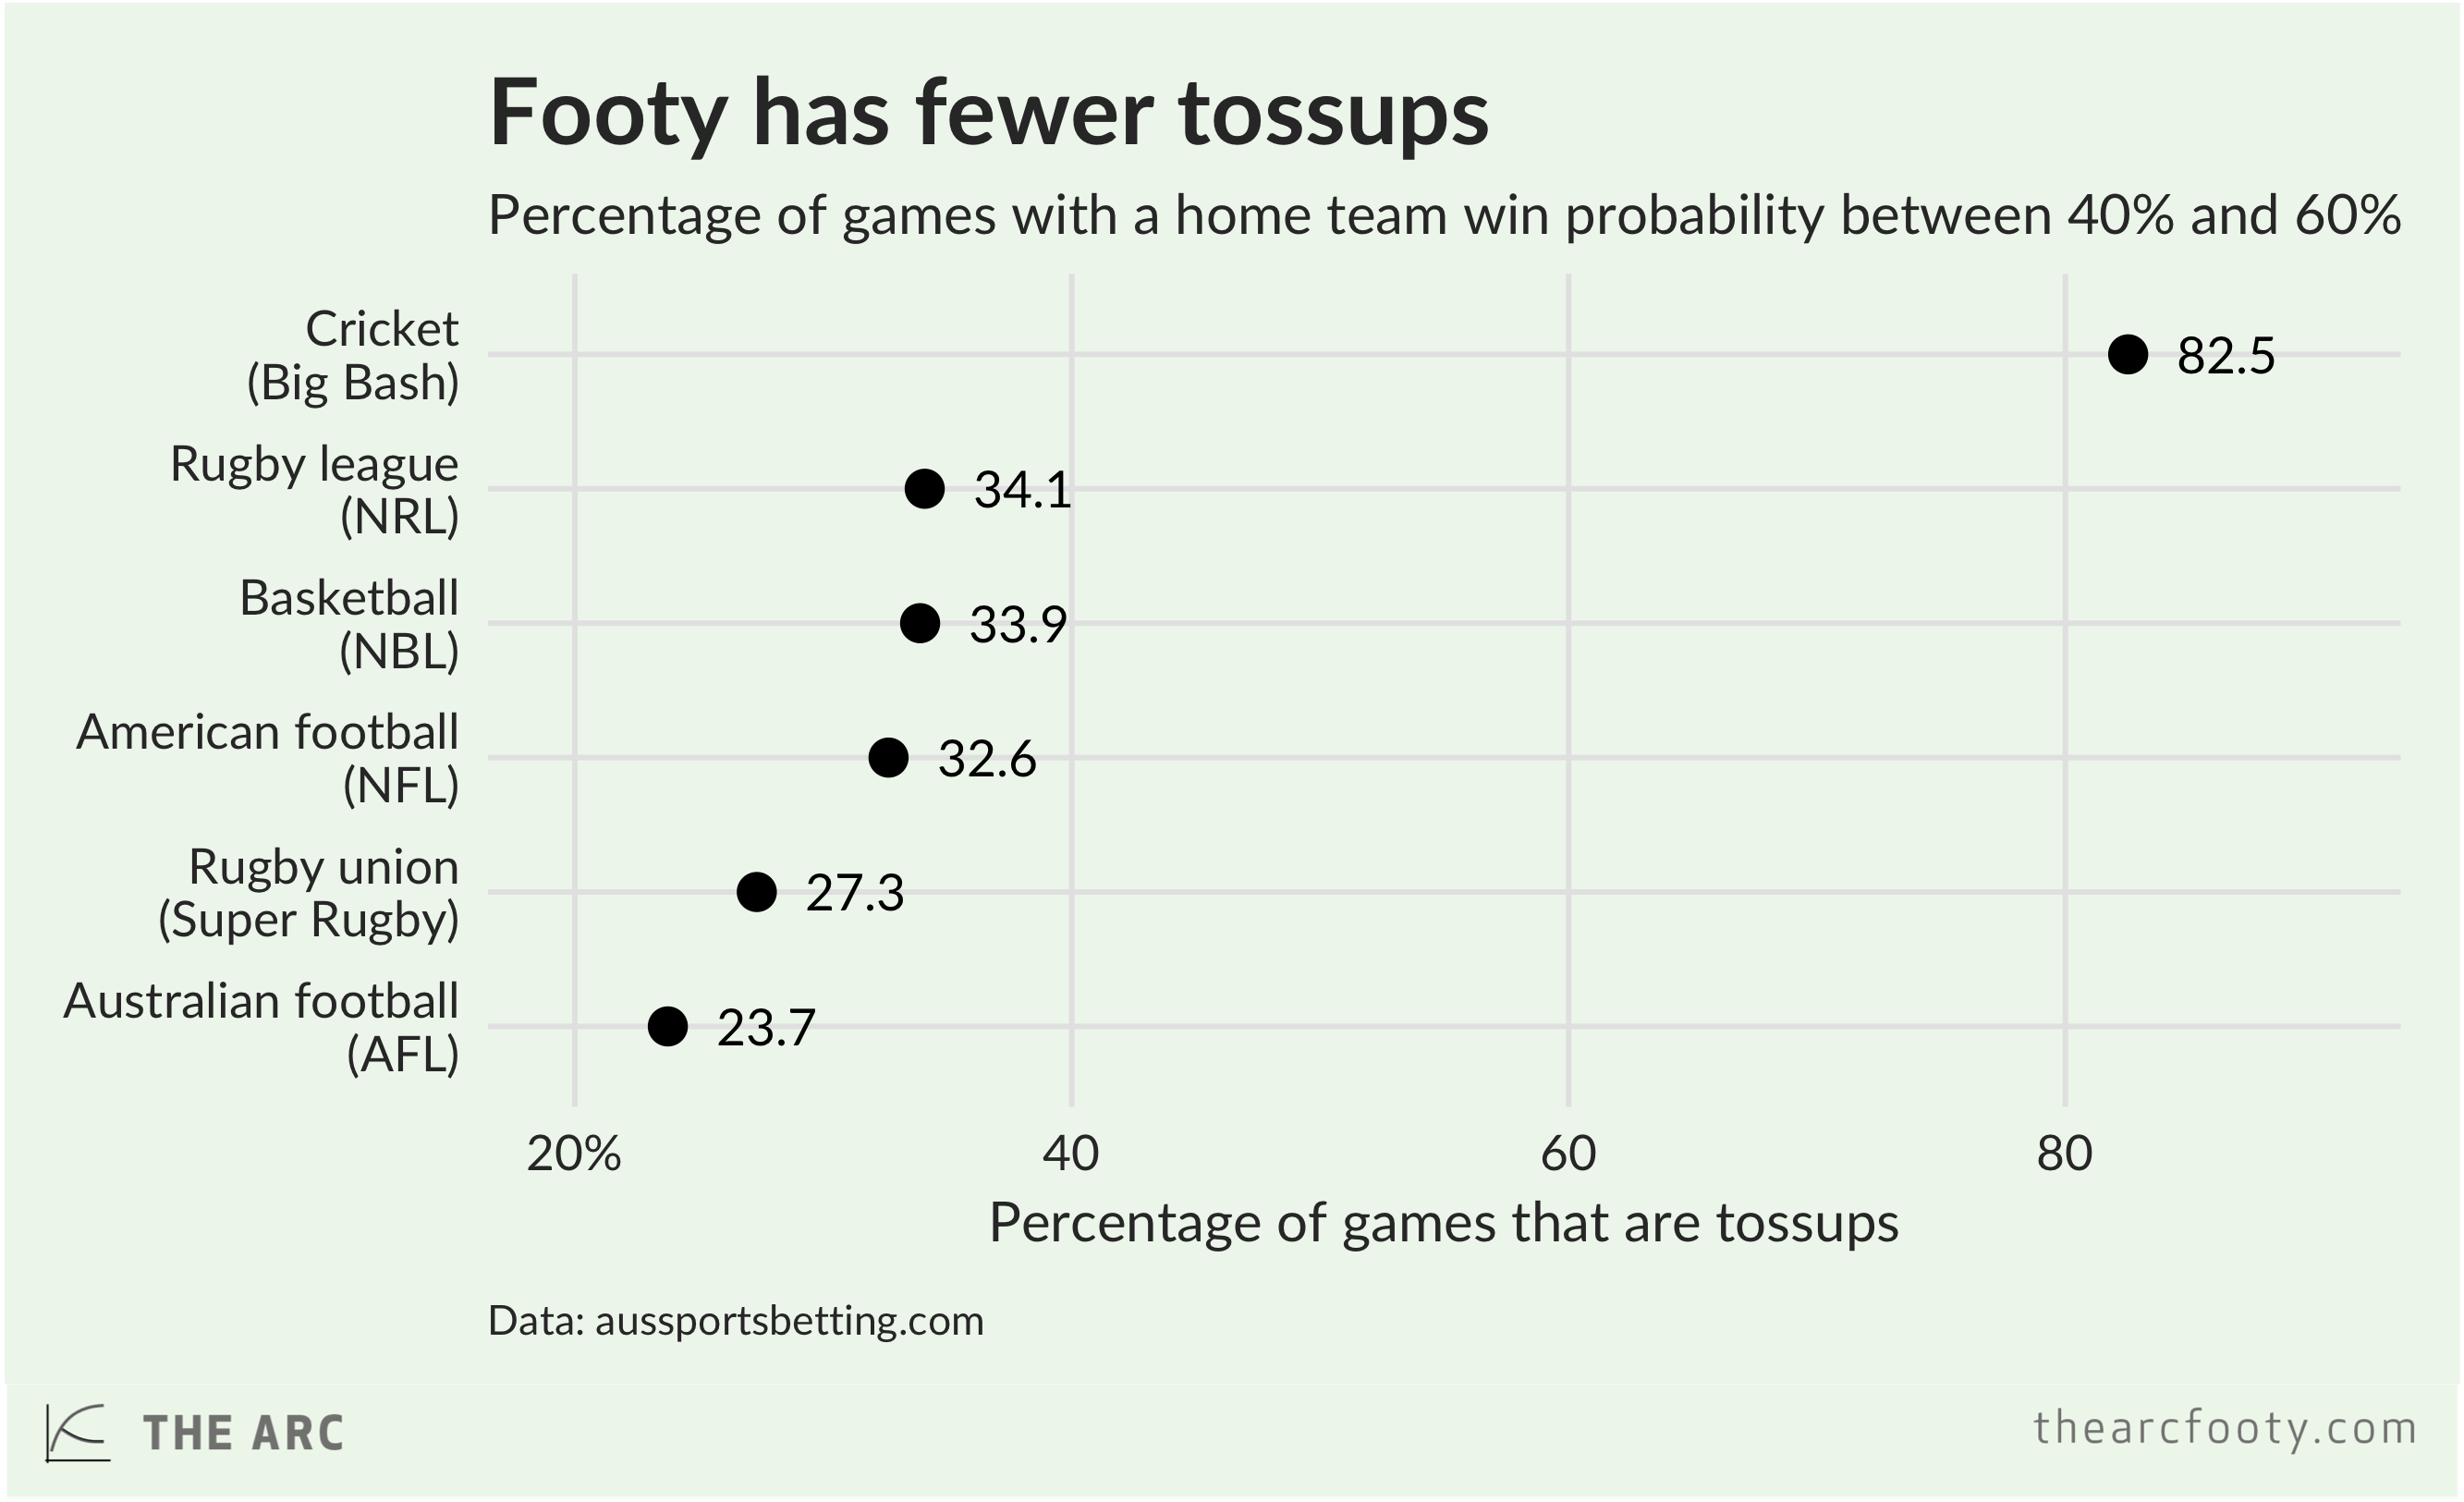 Footy has fewer tossups than other sports